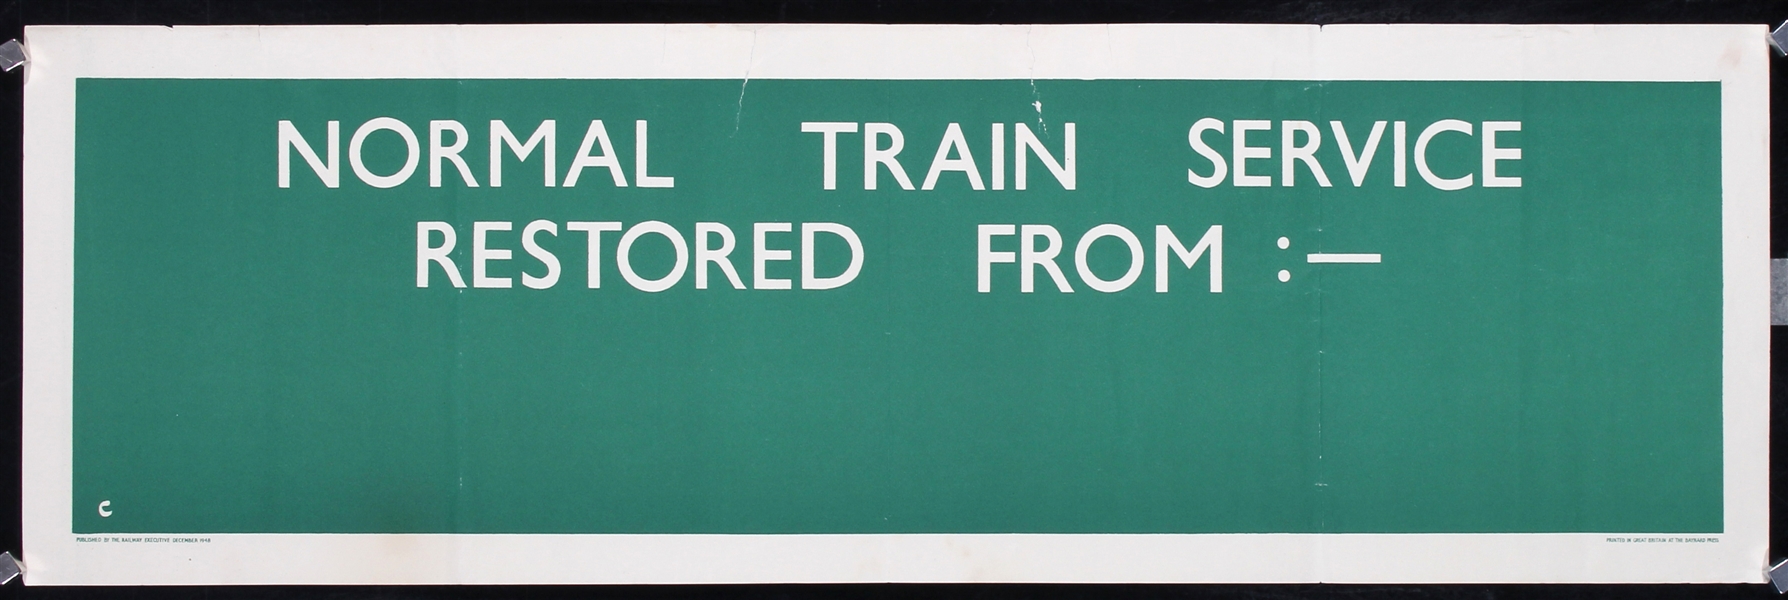 Normal Train Service Restored From, 1948